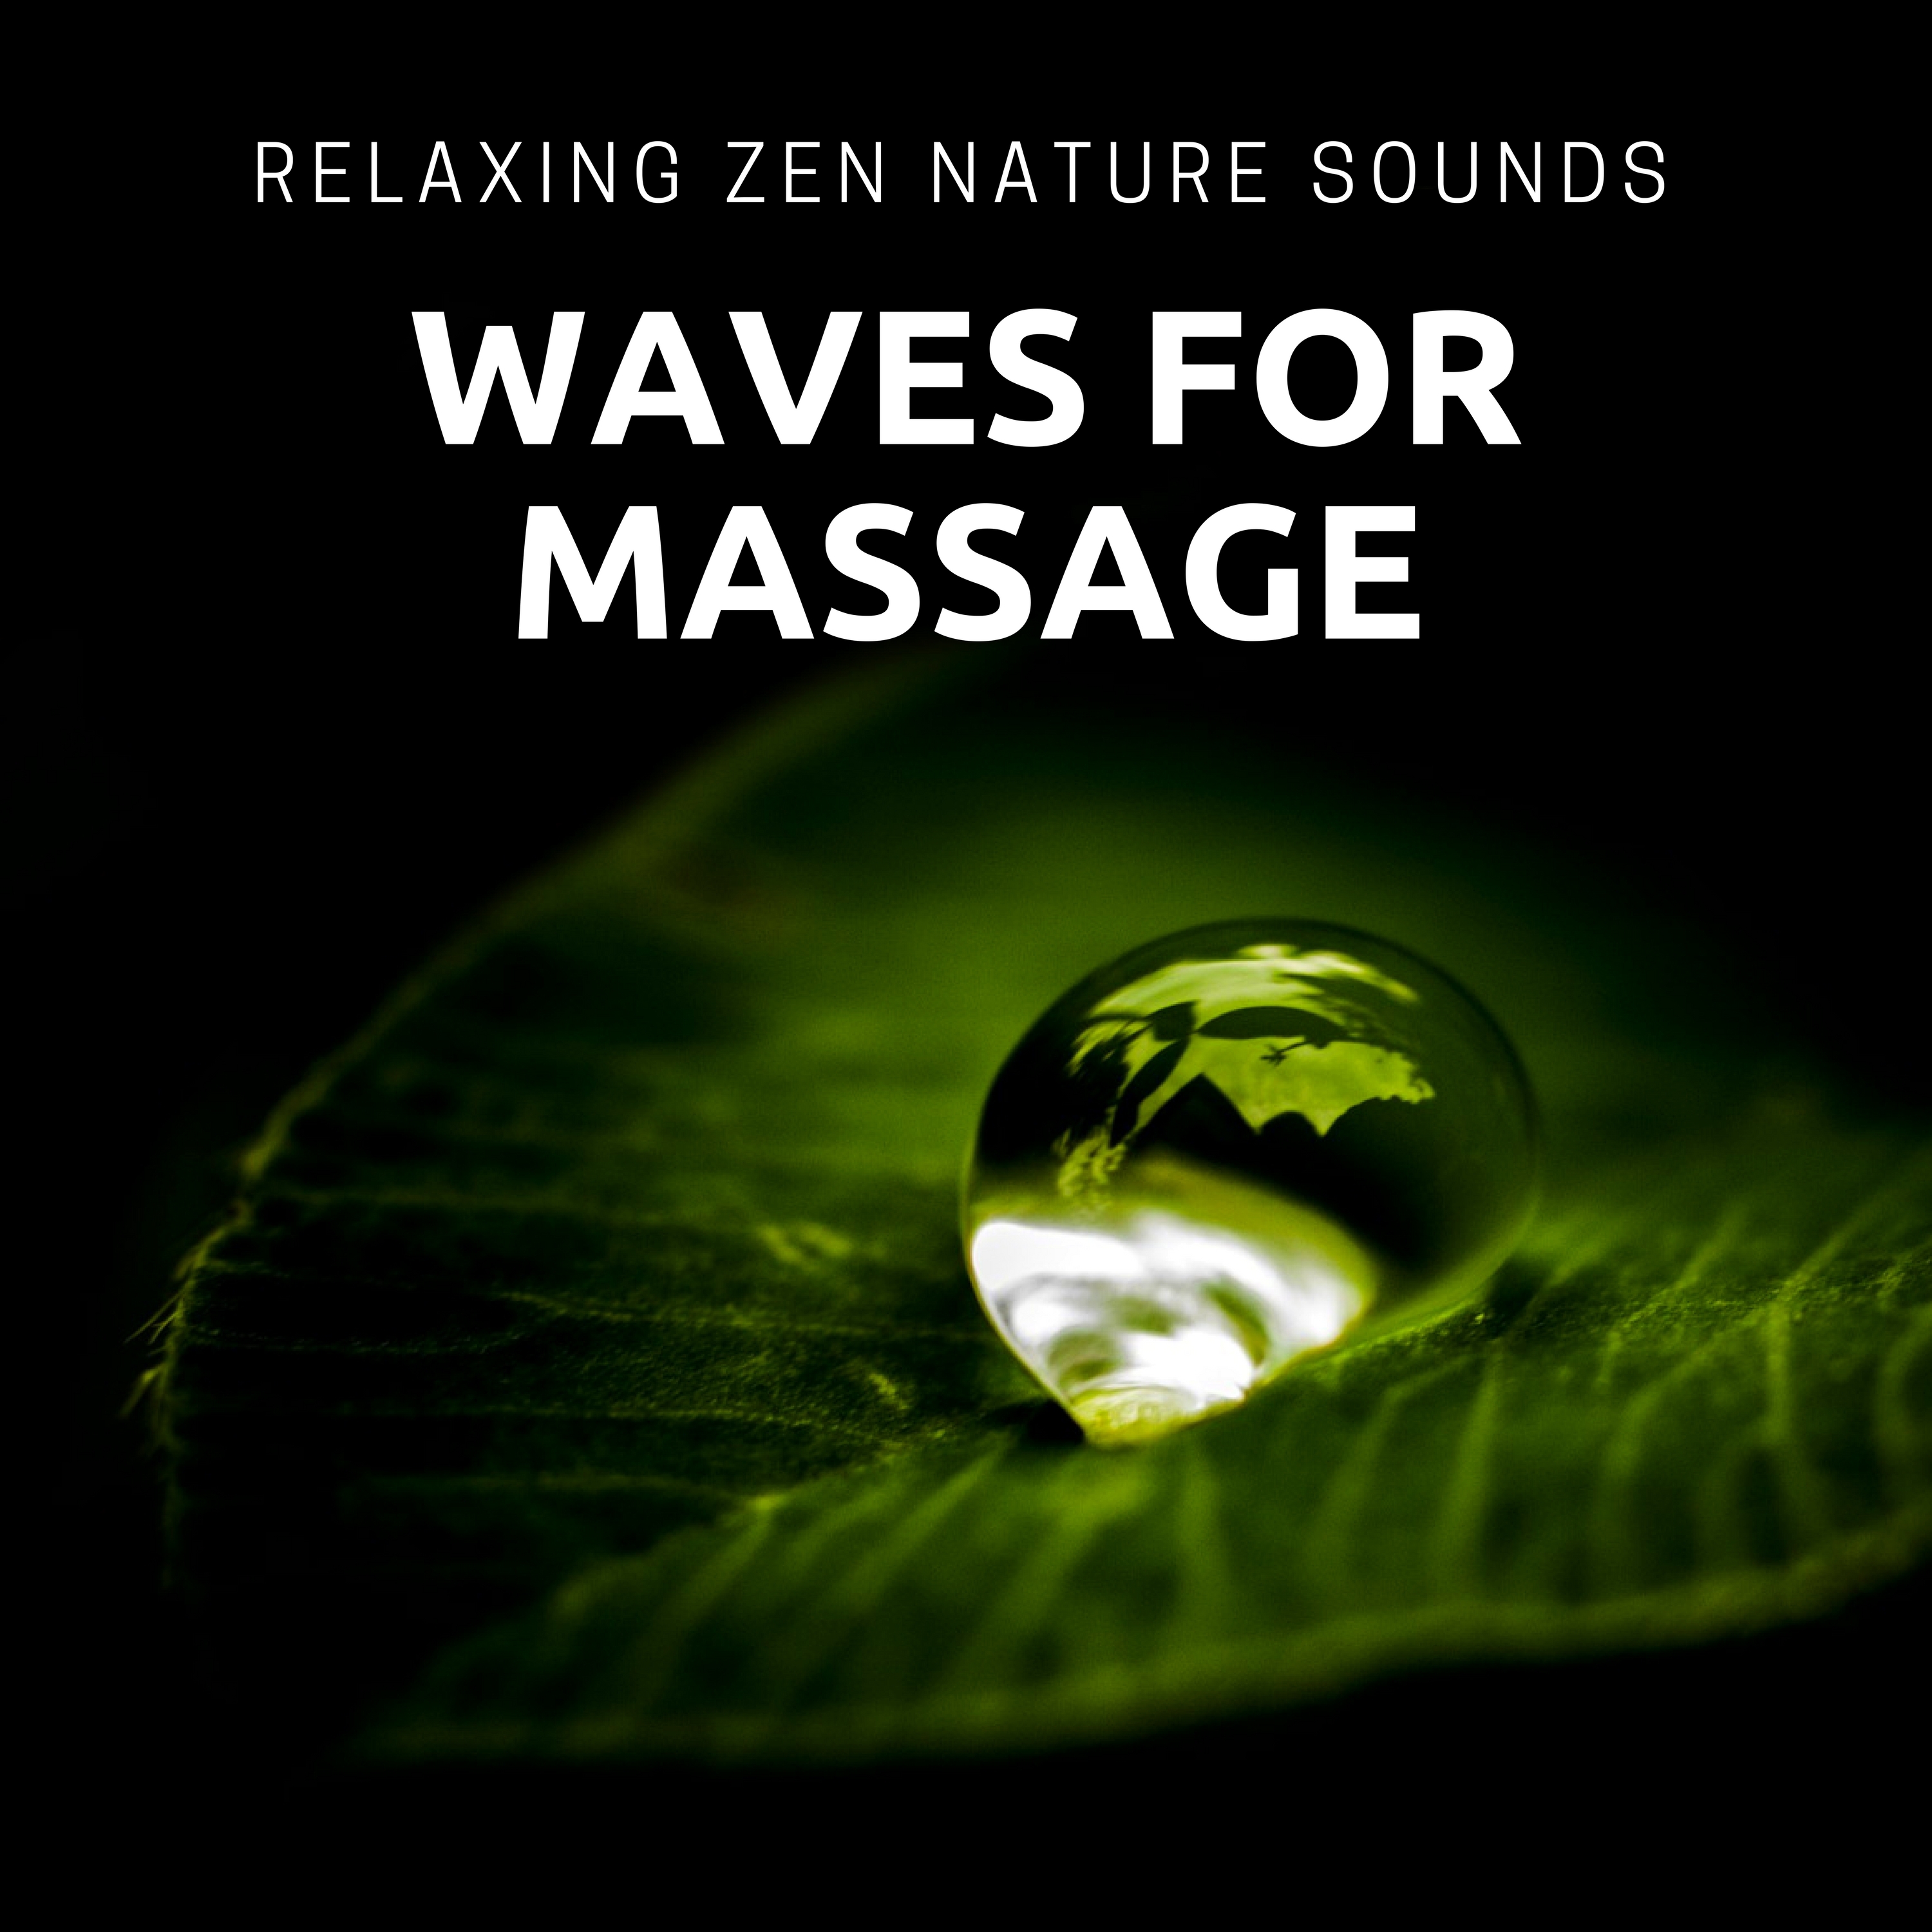 Waves for Massage - Relaxing Zen Nature Sounds for Reiki, Spa, Yoga, Meditation and Sleep Therapy